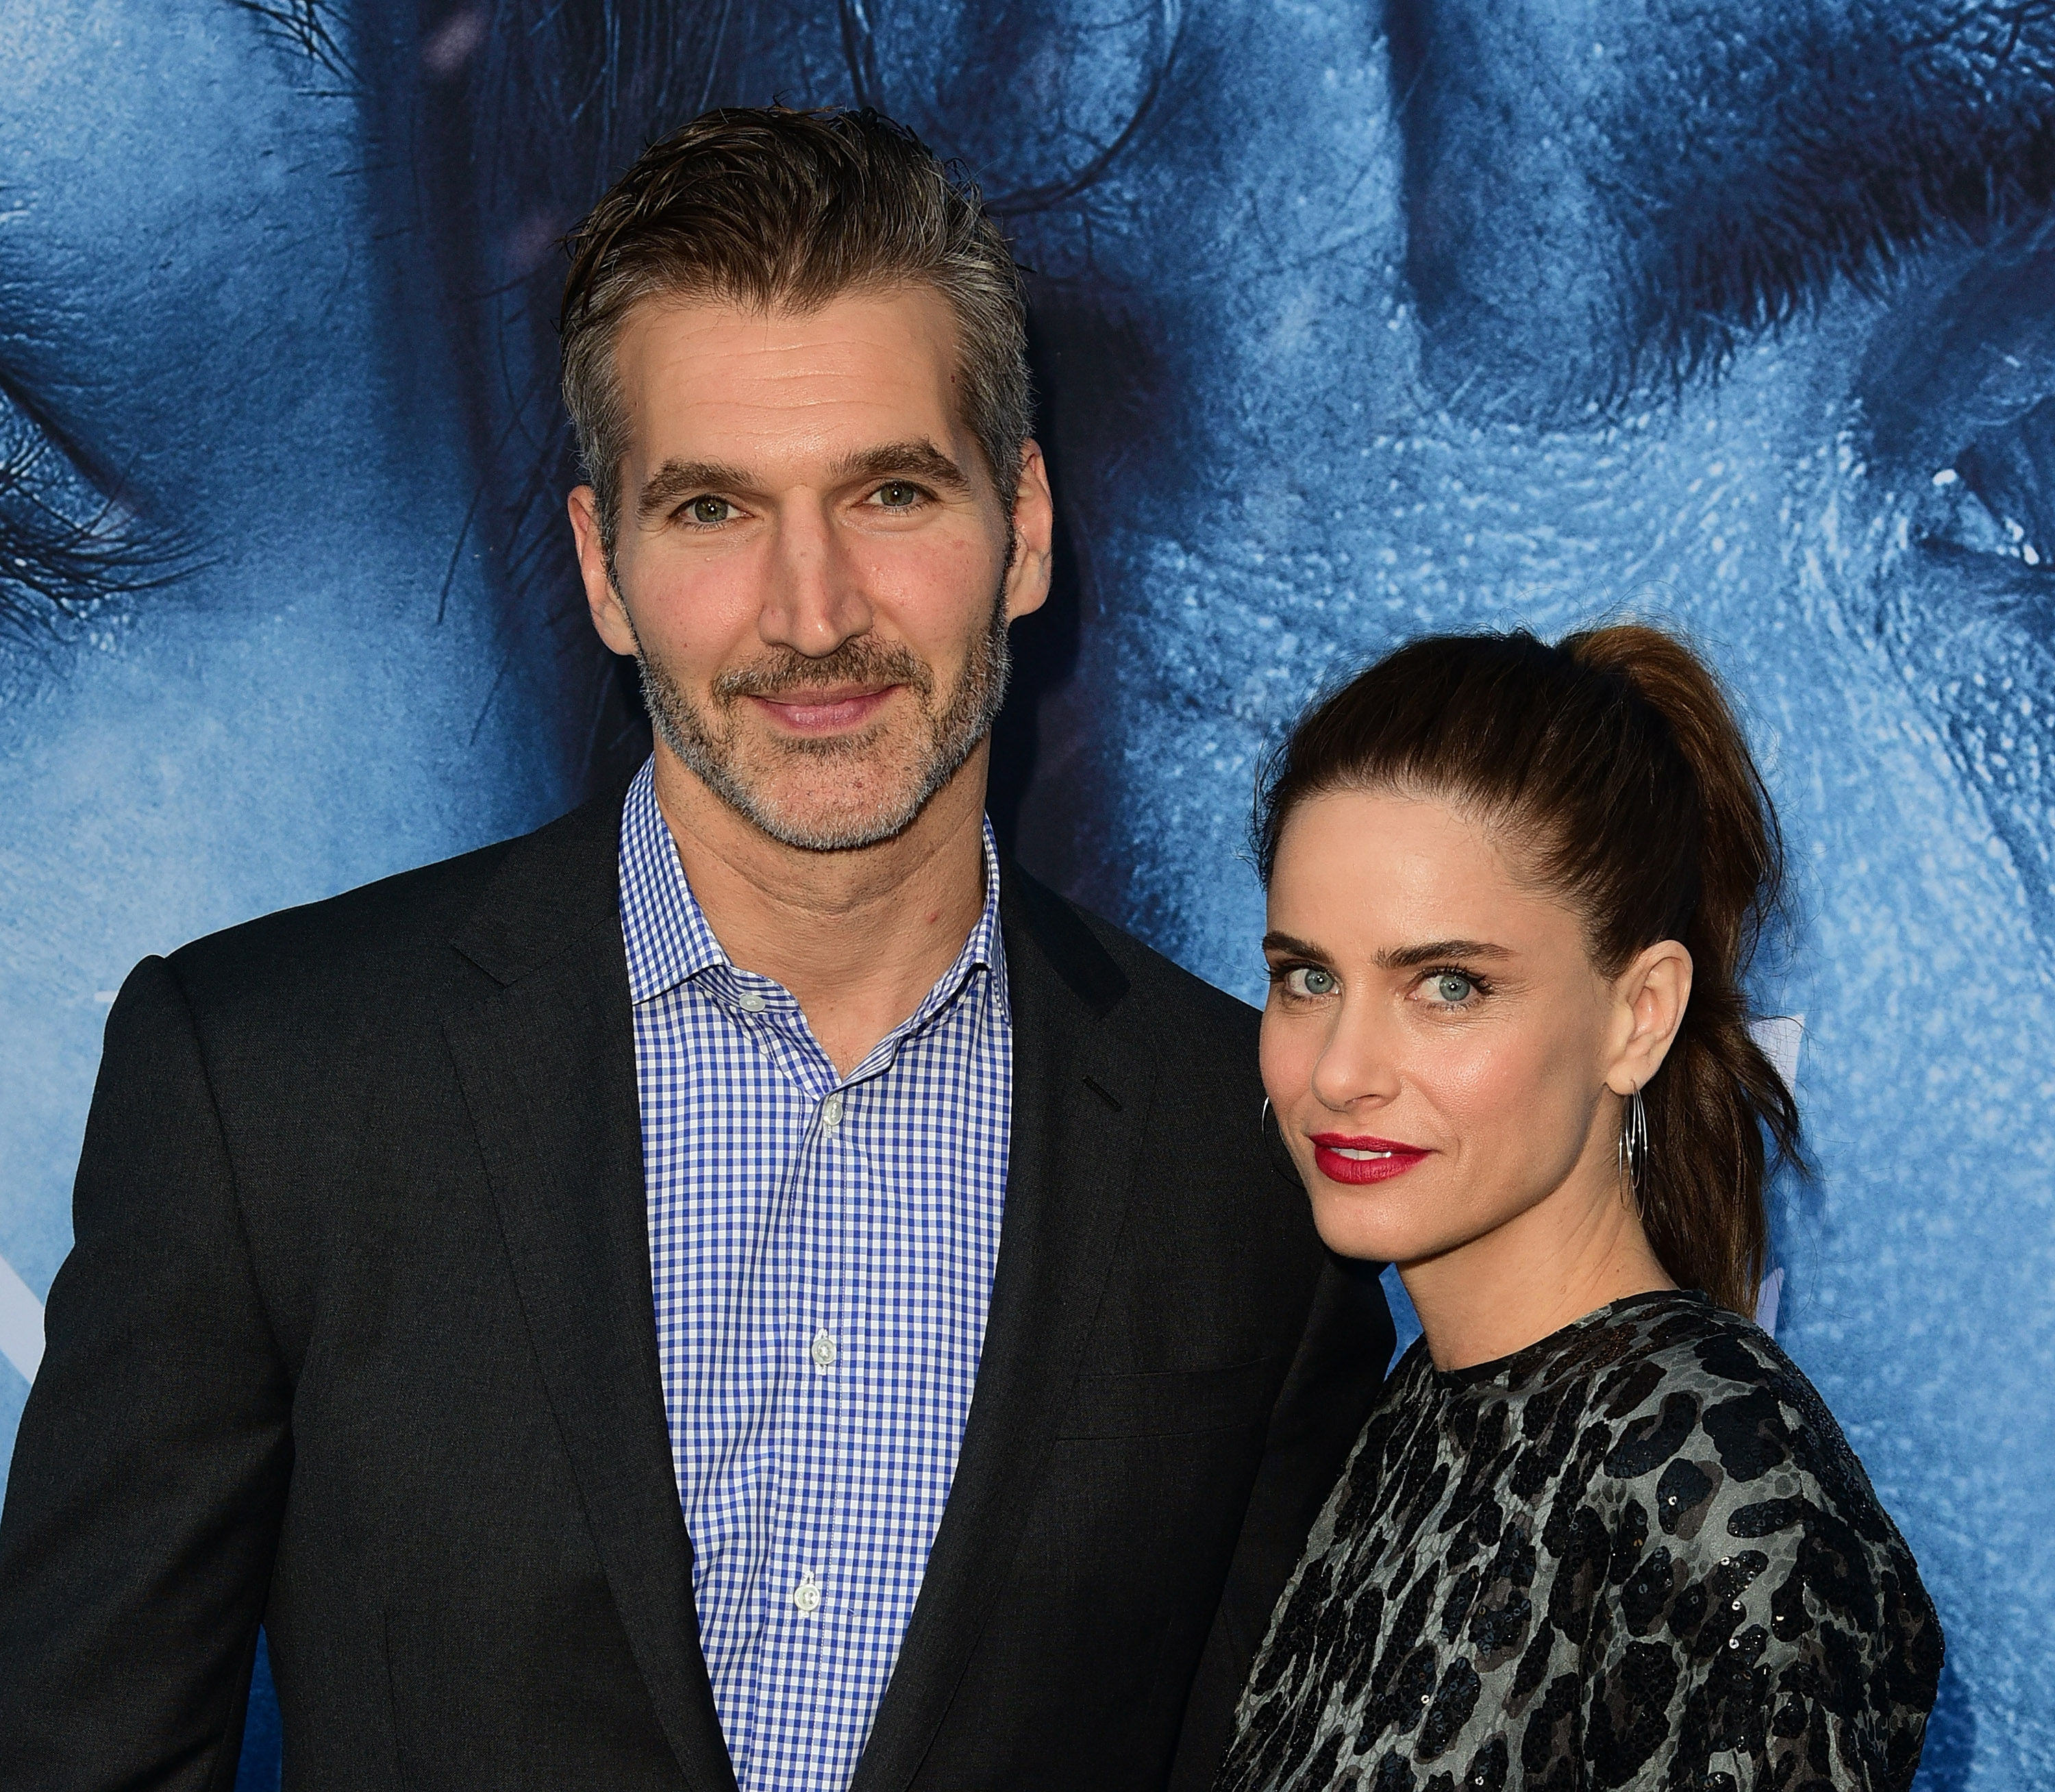 David Benioff and Amanda Peet attend the Season 7 Premiere Of HBO's "Game Of Thrones" on July 12, 2017, in Los Angeles, California. | Source: Getty Images